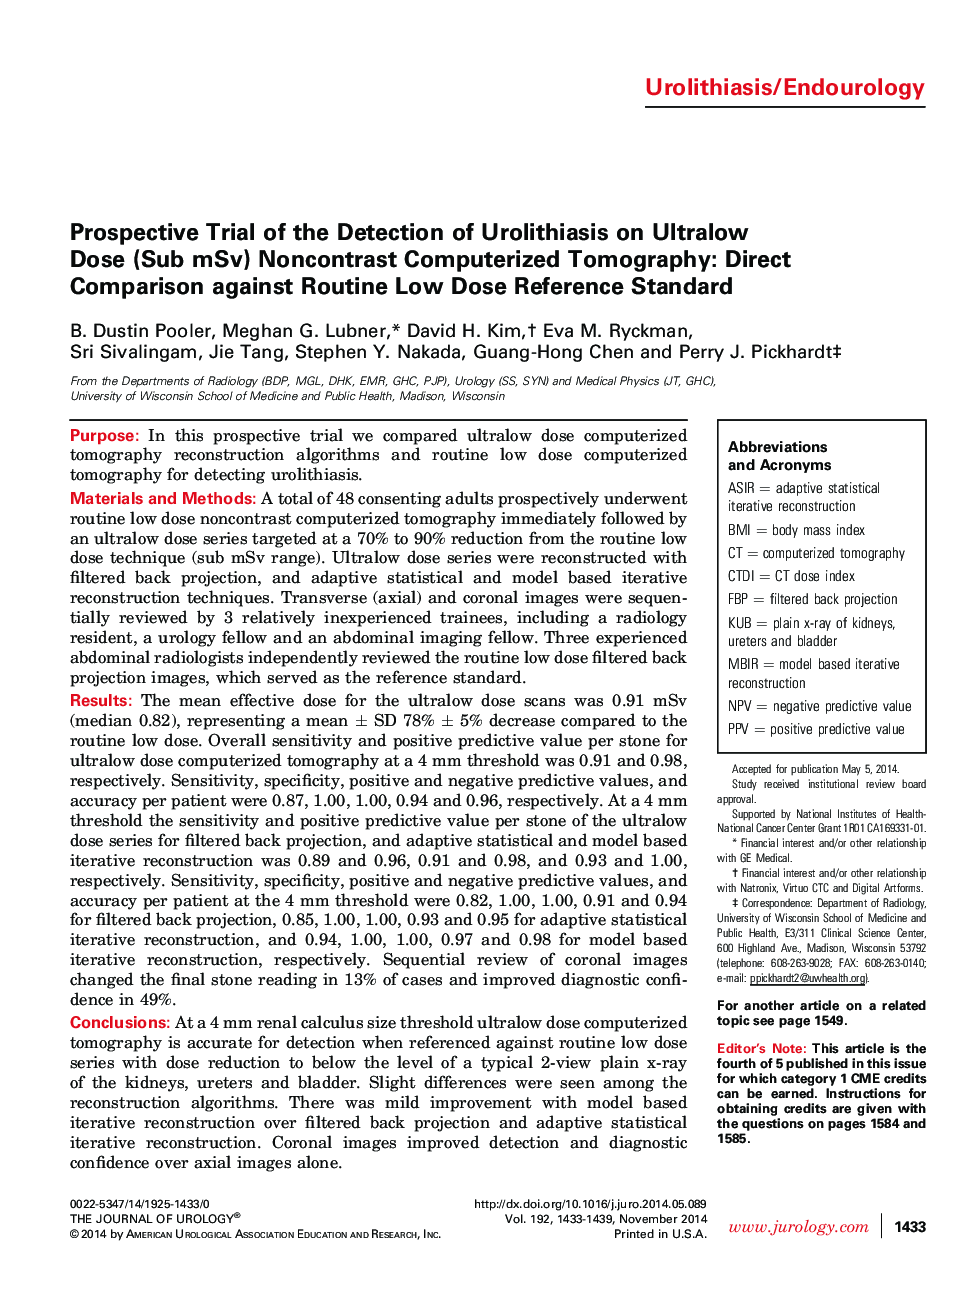 Prospective Trial of the Detection of Urolithiasis on Ultralow Dose (Sub mSv) Noncontrast Computerized Tomography: Direct Comparison against Routine Low Dose Reference Standard 